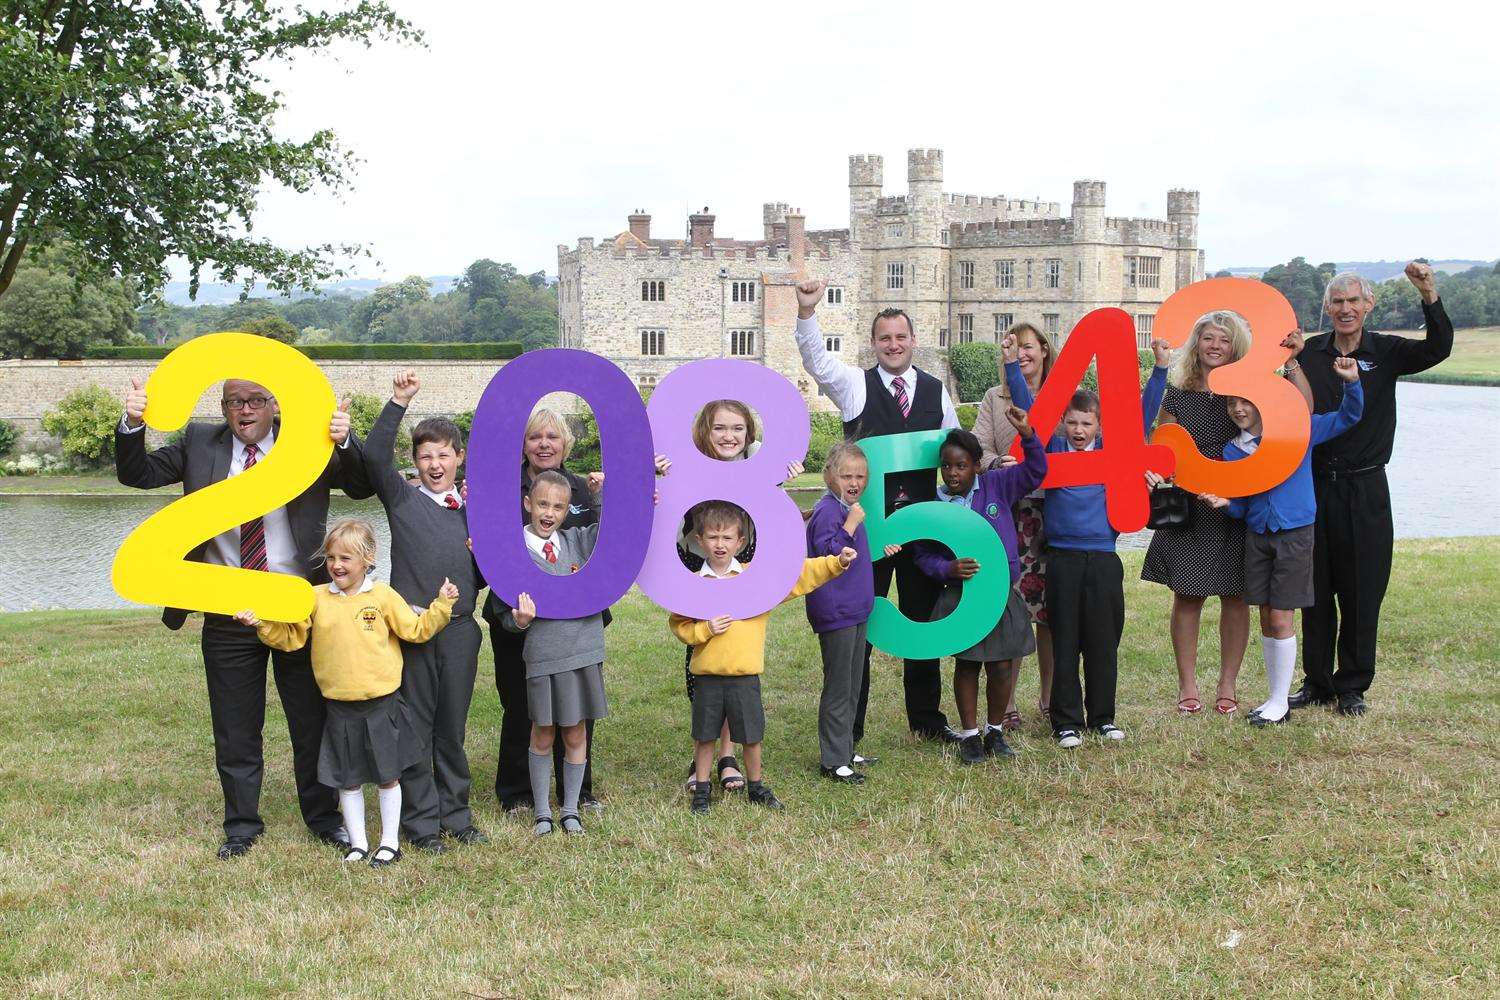 Celebrating getting more than 200,000 car journeys off the road are sponsors from left, David Cavender (Specsavers), Margaret Brook (IMP), Hannah Lawrence (Leeds Castle), Matt Trusty (Specsavers), Elizabeth Carr (Mini Babybel), Libby Lawson (KM) and Nicholas Brook (IMP) with KM Walk to School participants at Leeds Castle